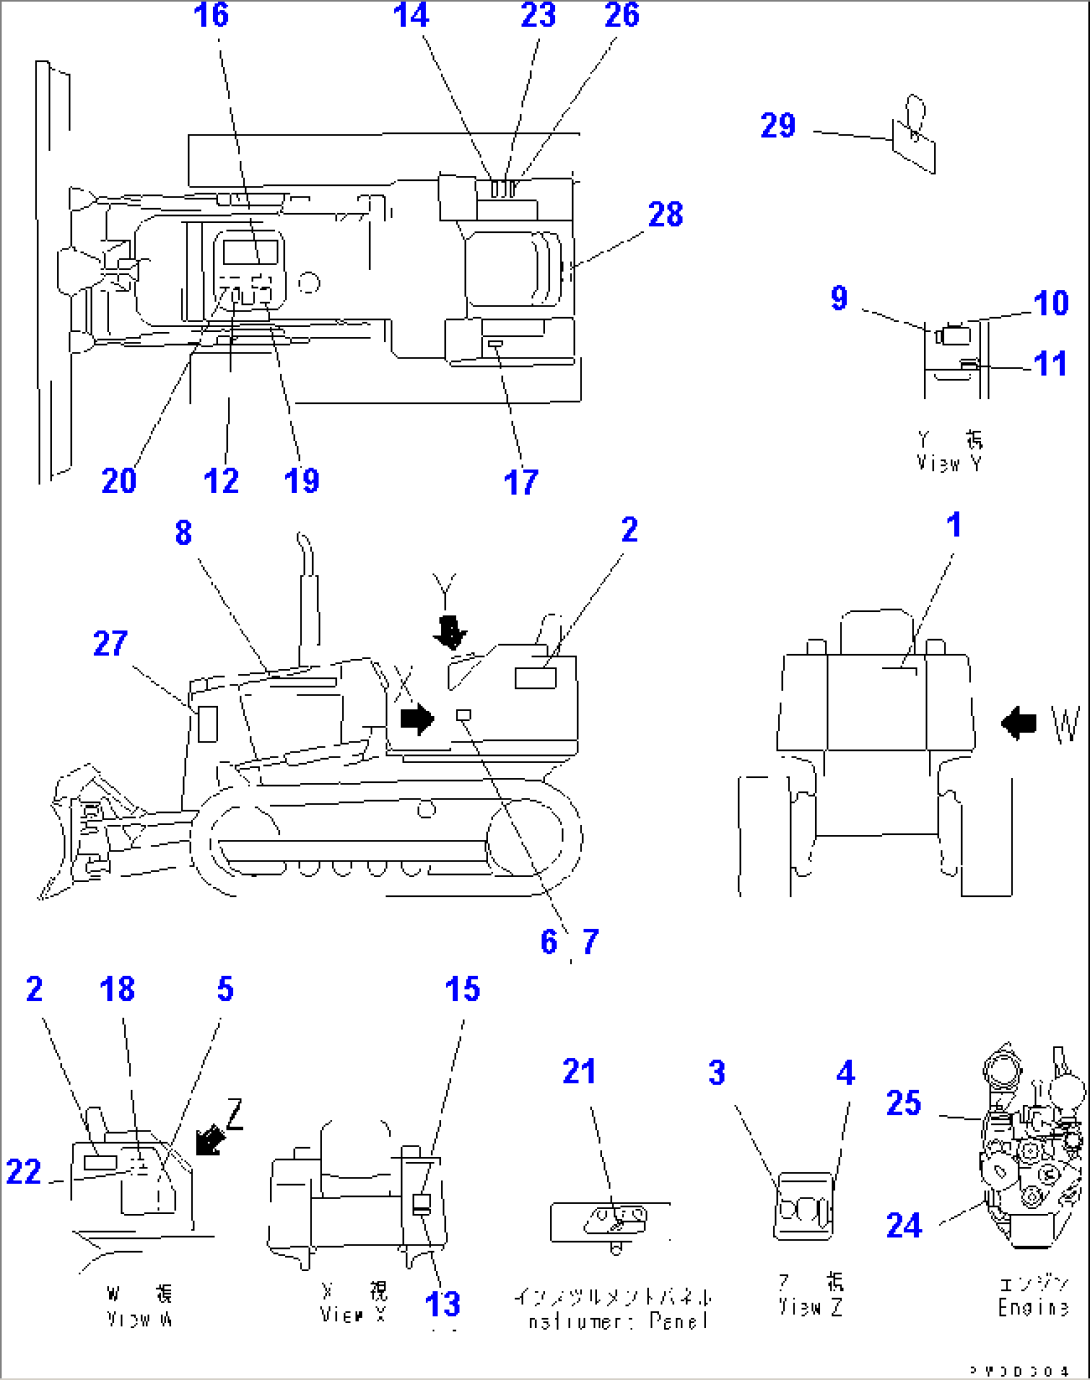 MARKS AND PLATES (ARABIC)(#79575-81600)